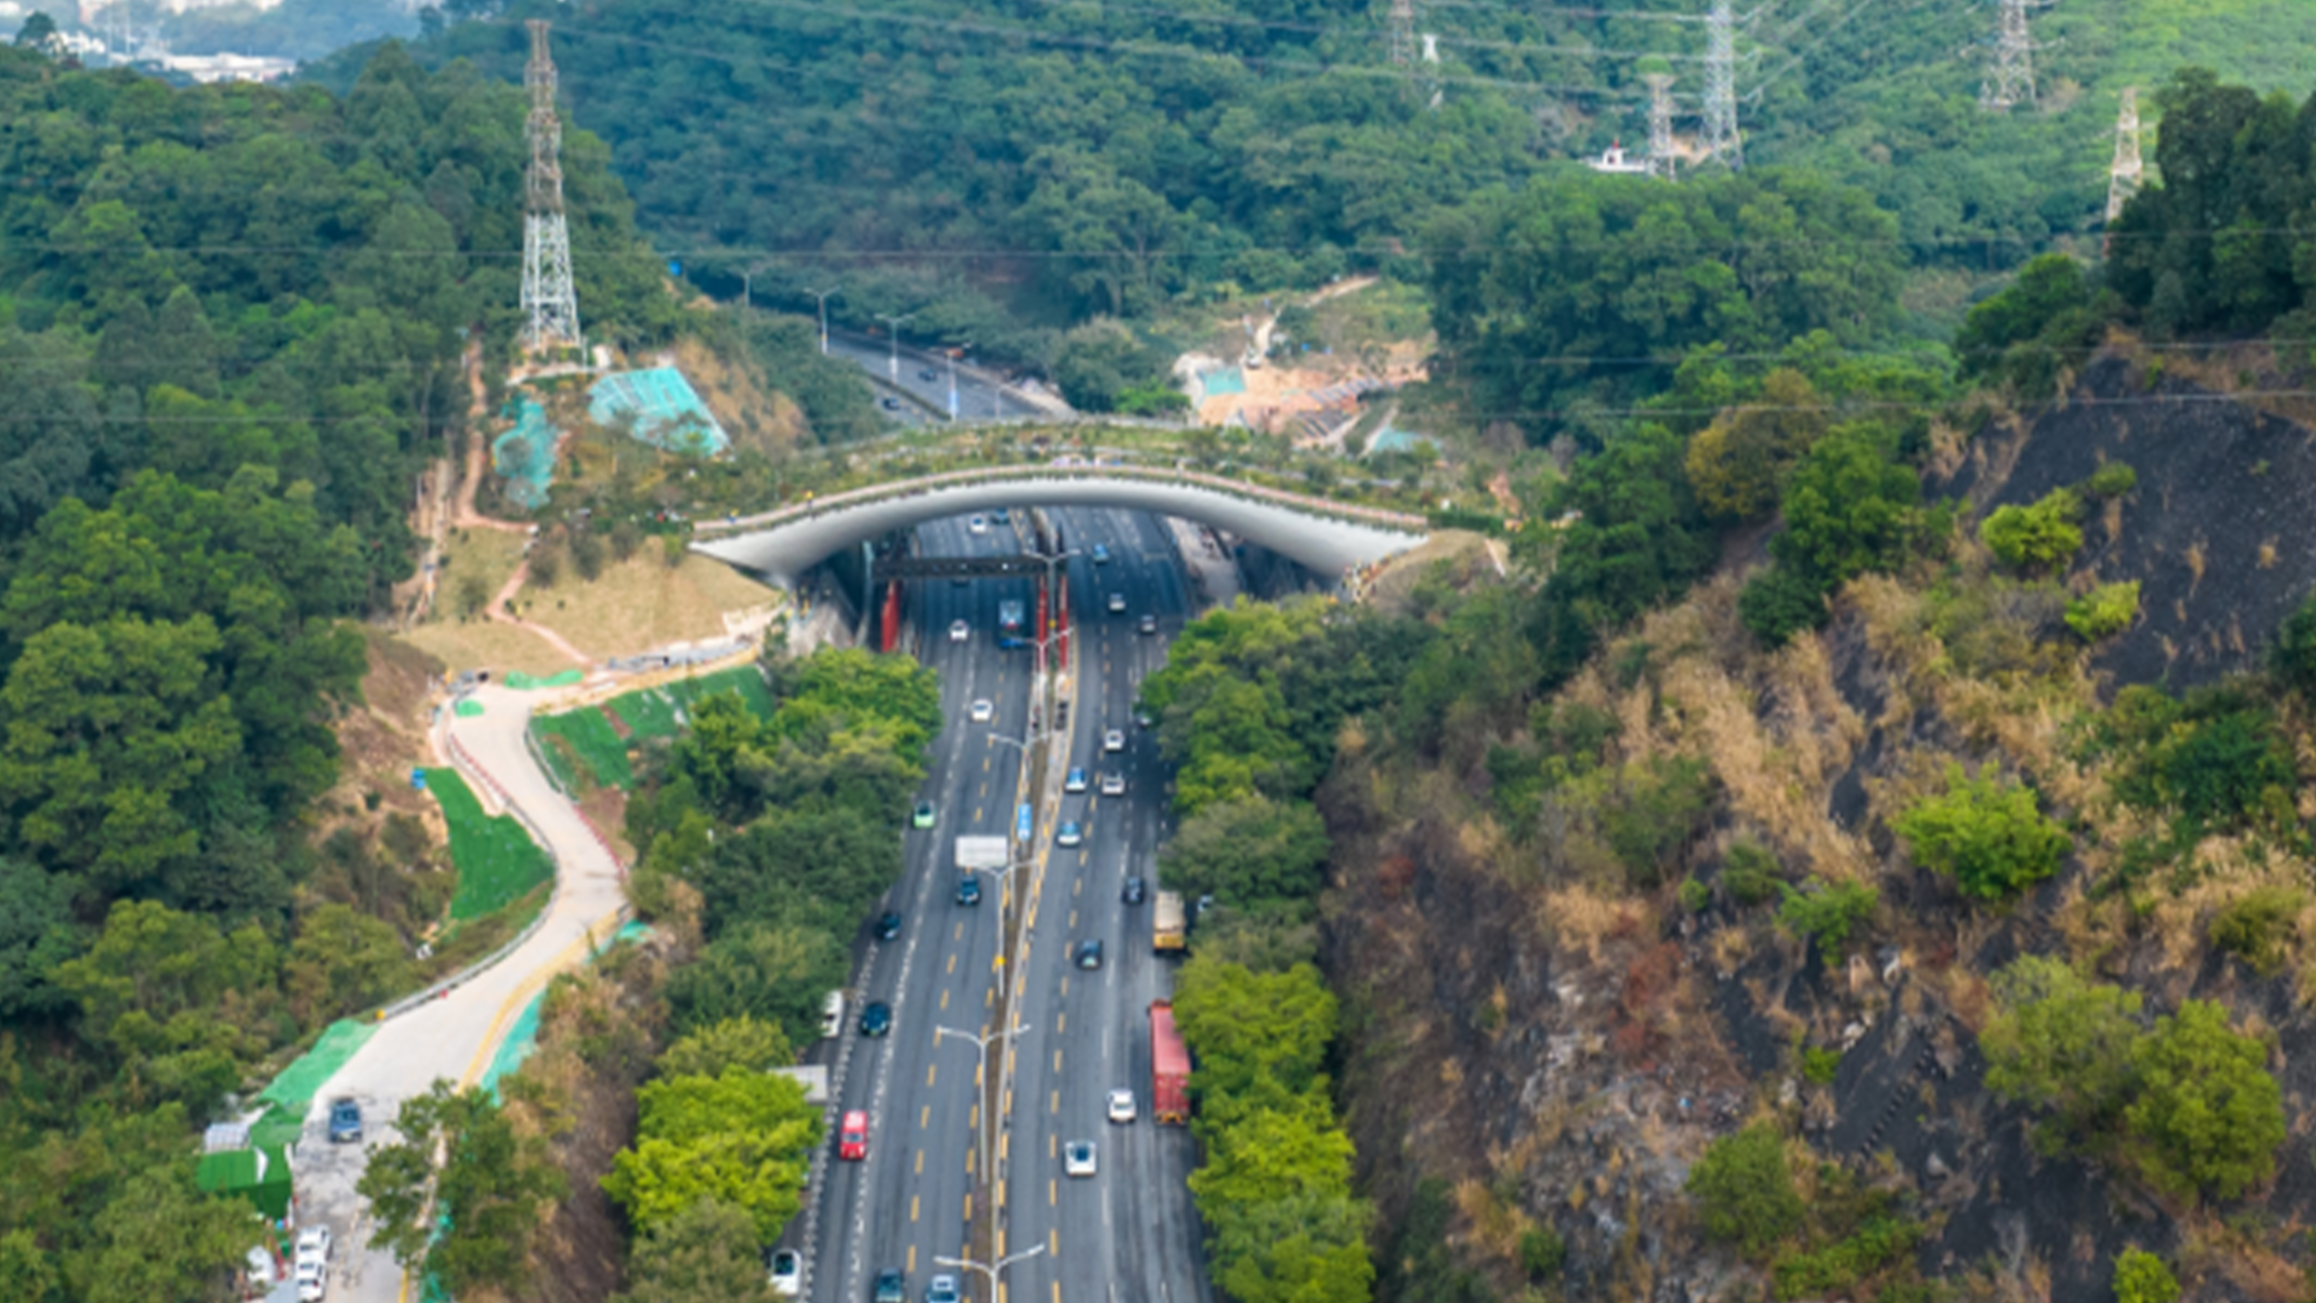 This undated file photo shows the Kunpeng Trail No.1 Bridge connecting the Yinhu and Meilin mountains, Shenzhen, China. /CFP